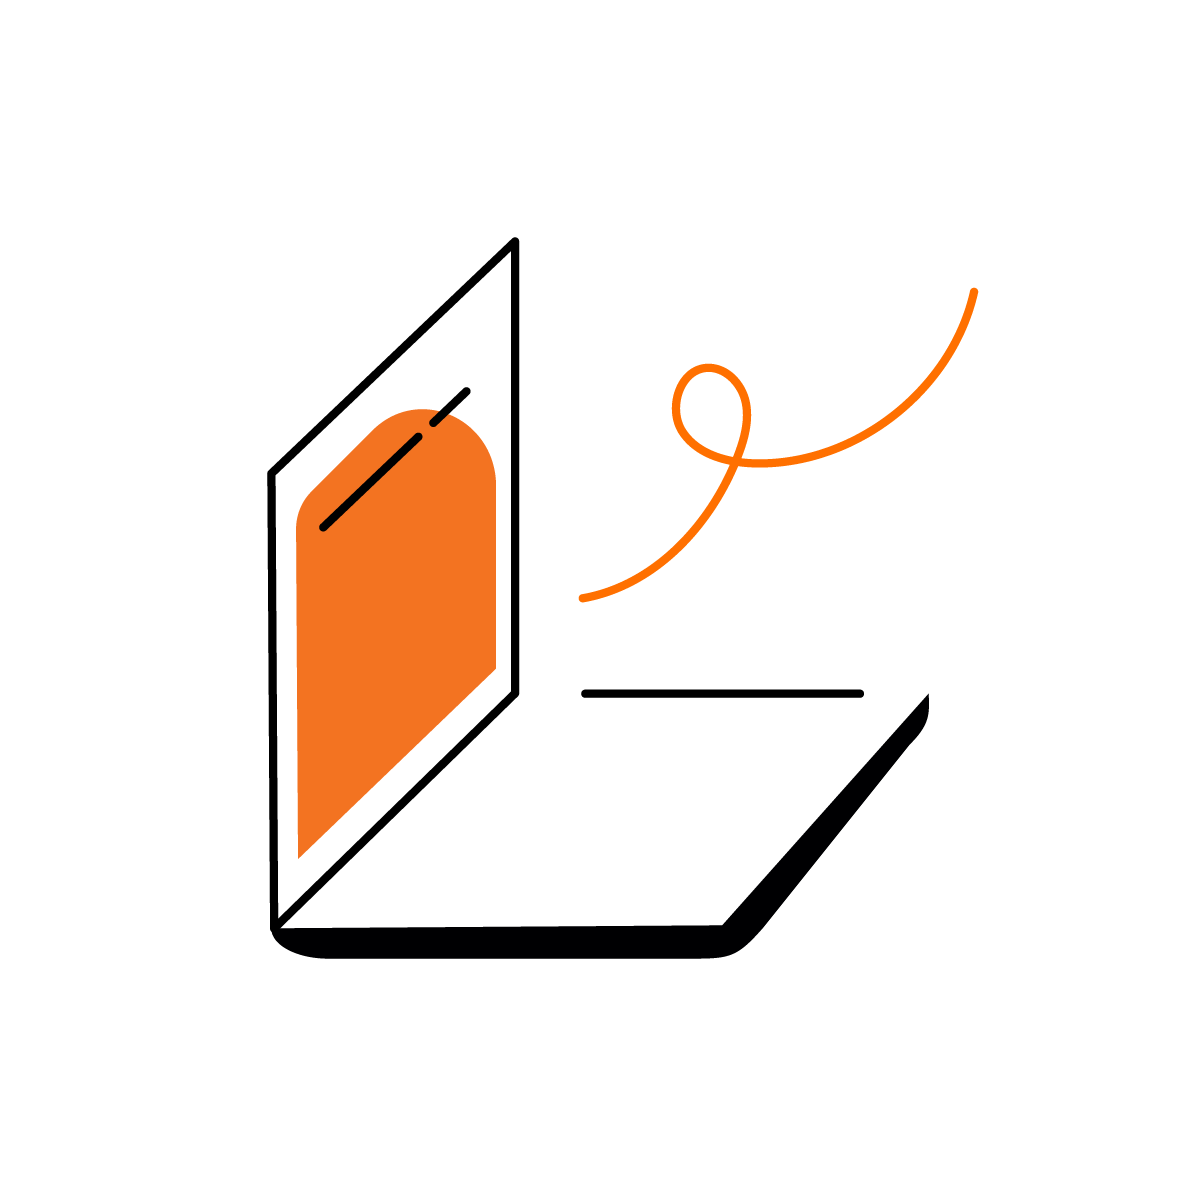 A minimalist graphic of an orange door slightly ajar, with a key hanging in the keyhole and its keychain forming an infinity symbol, representing endless customer support.